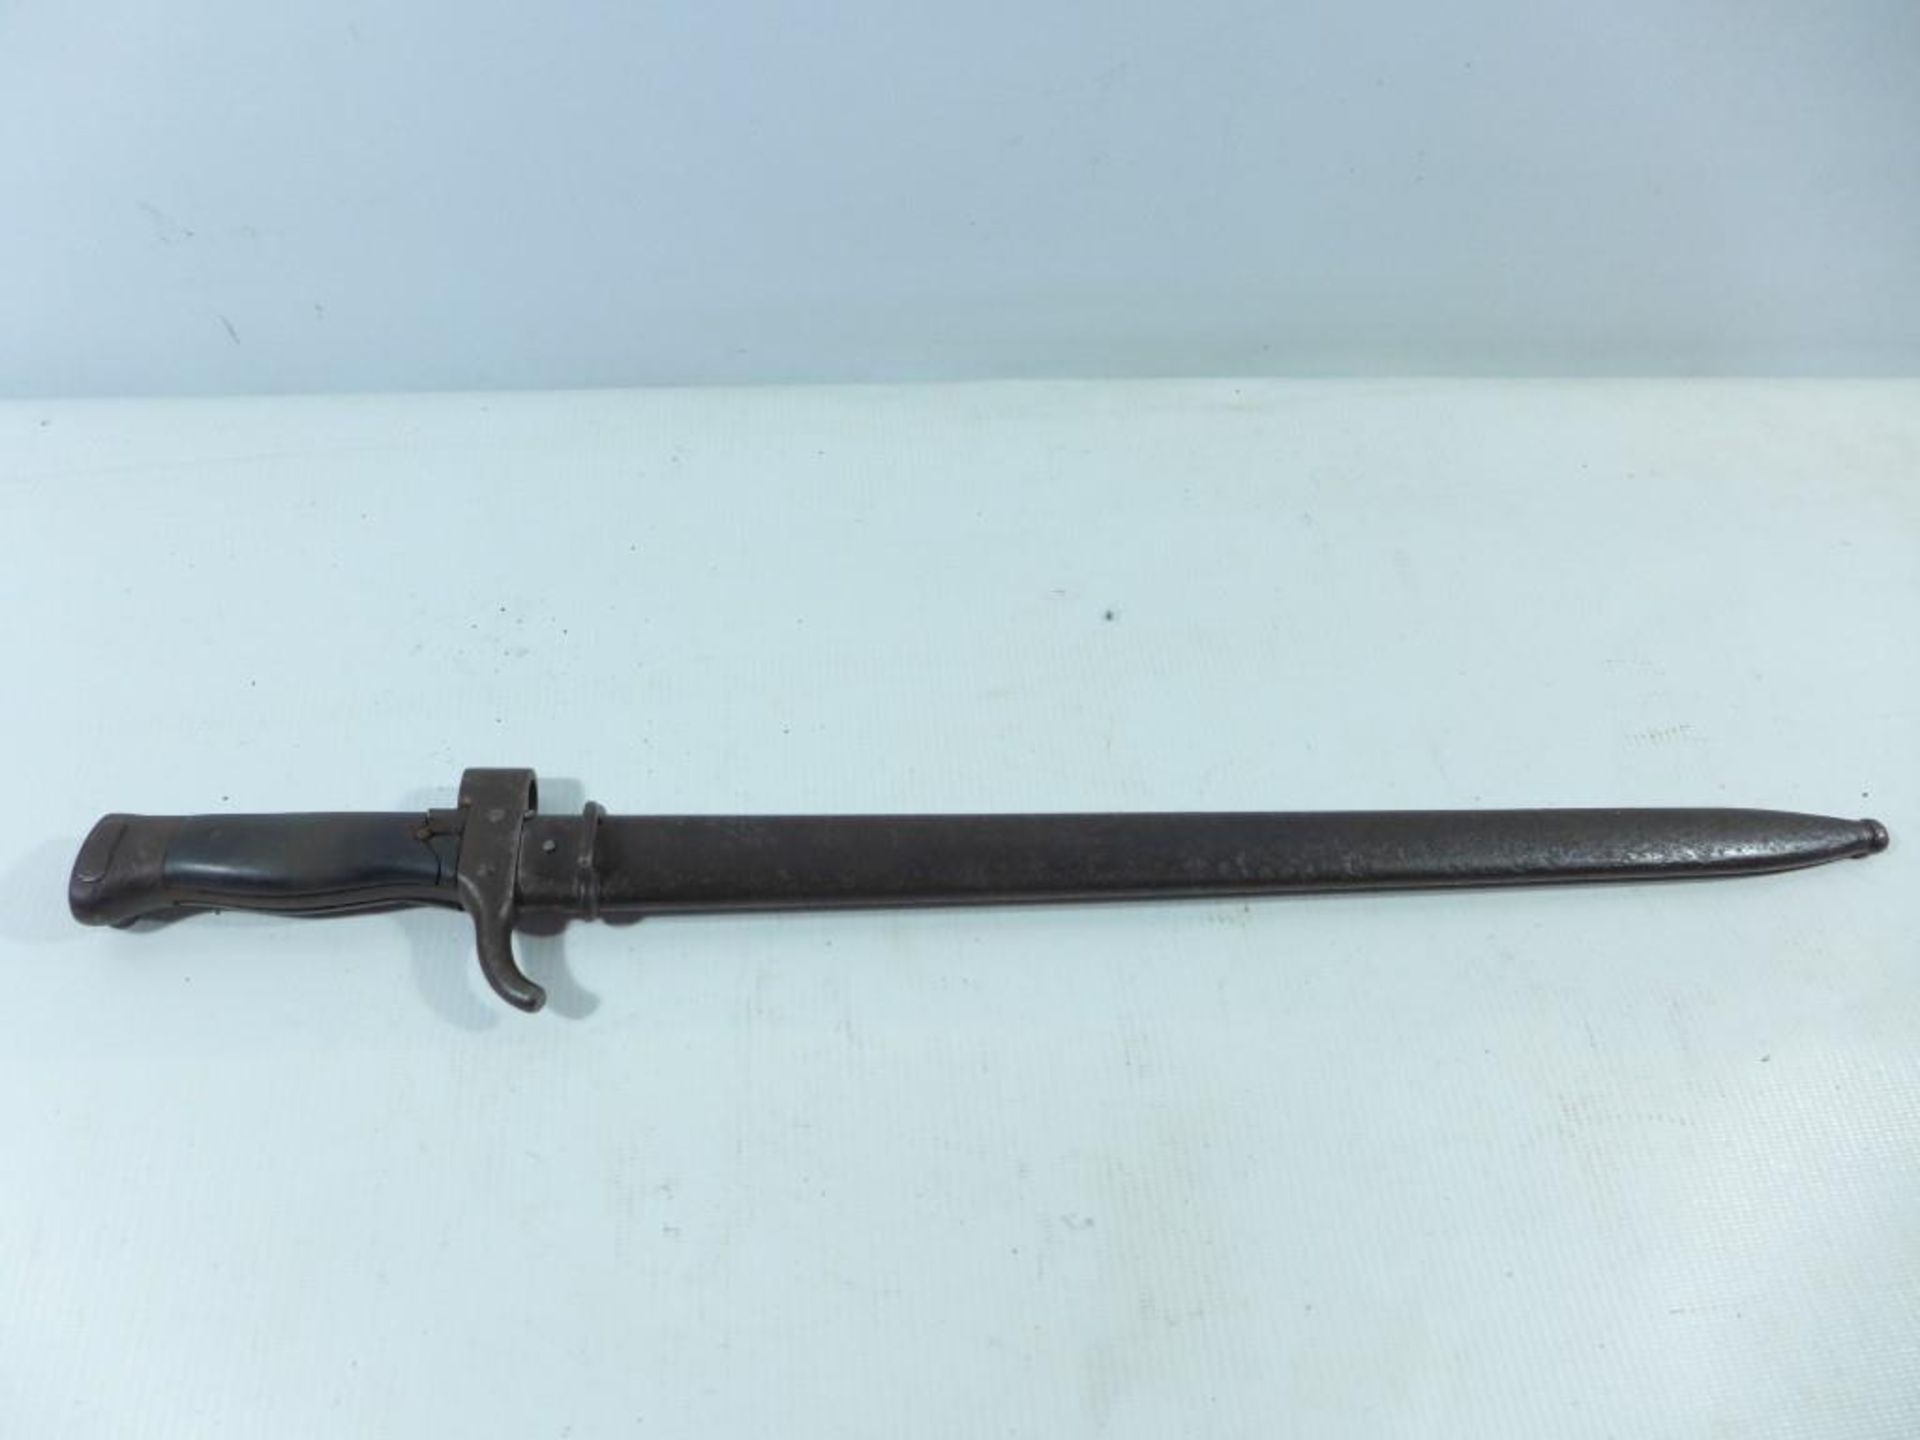 AN UNKNOWN ORIGIN BAYONET AND SCABBARD, 40CM BLADE - Image 4 of 7